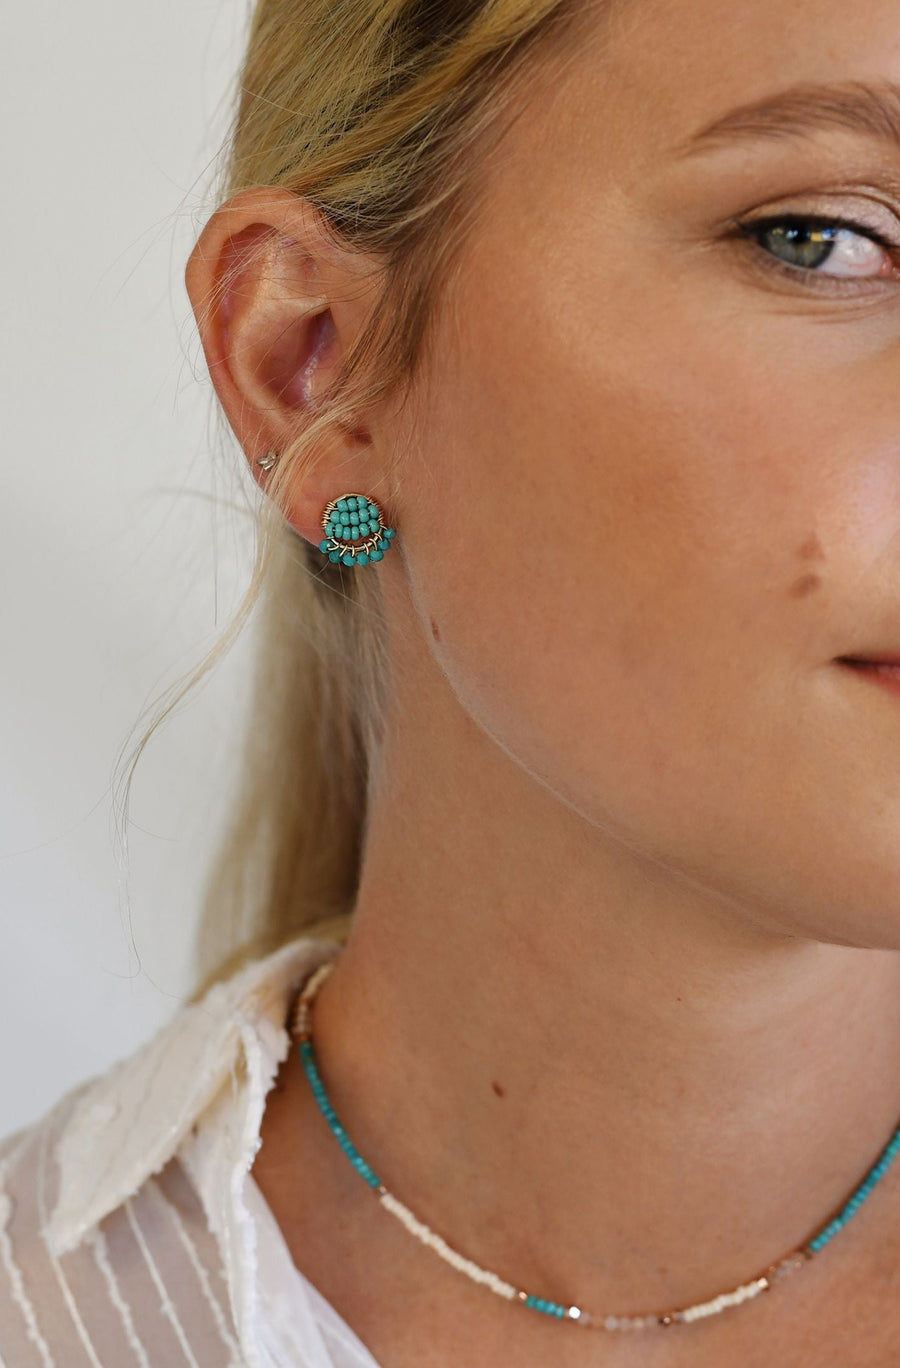 Mini Circle Earrings With Turquoise Drops - TURQUOISE